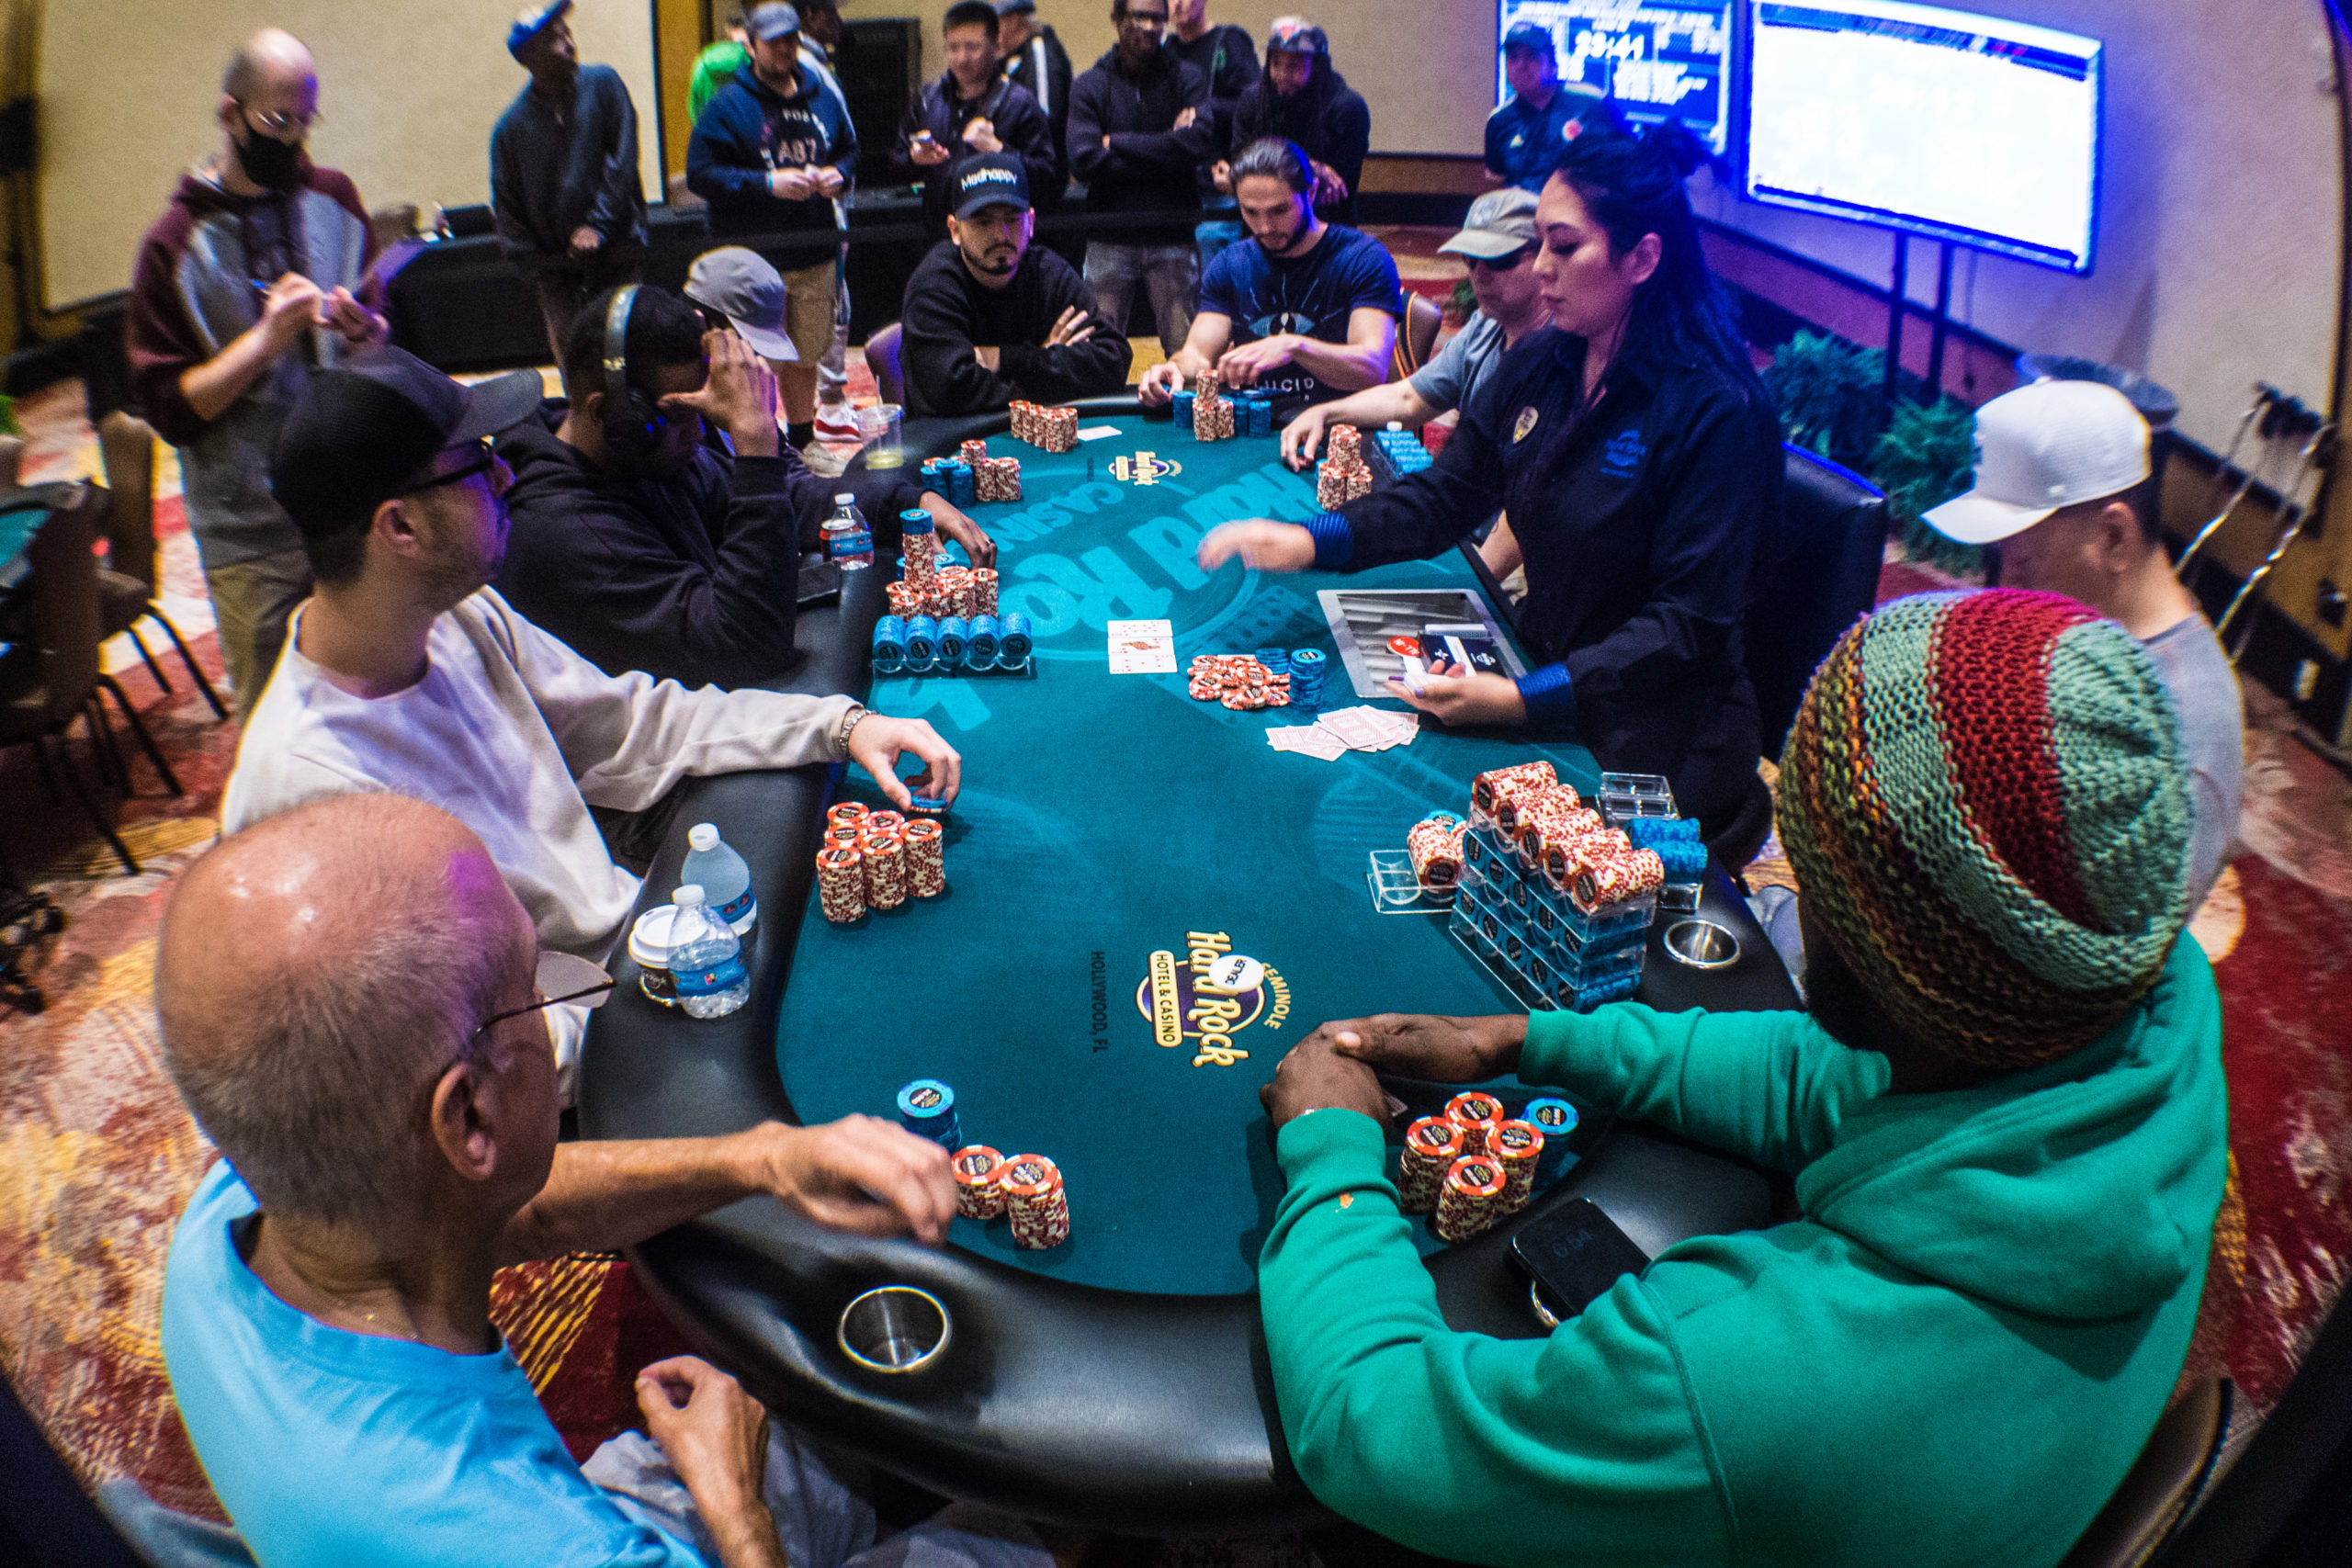 Event 1 Final Table